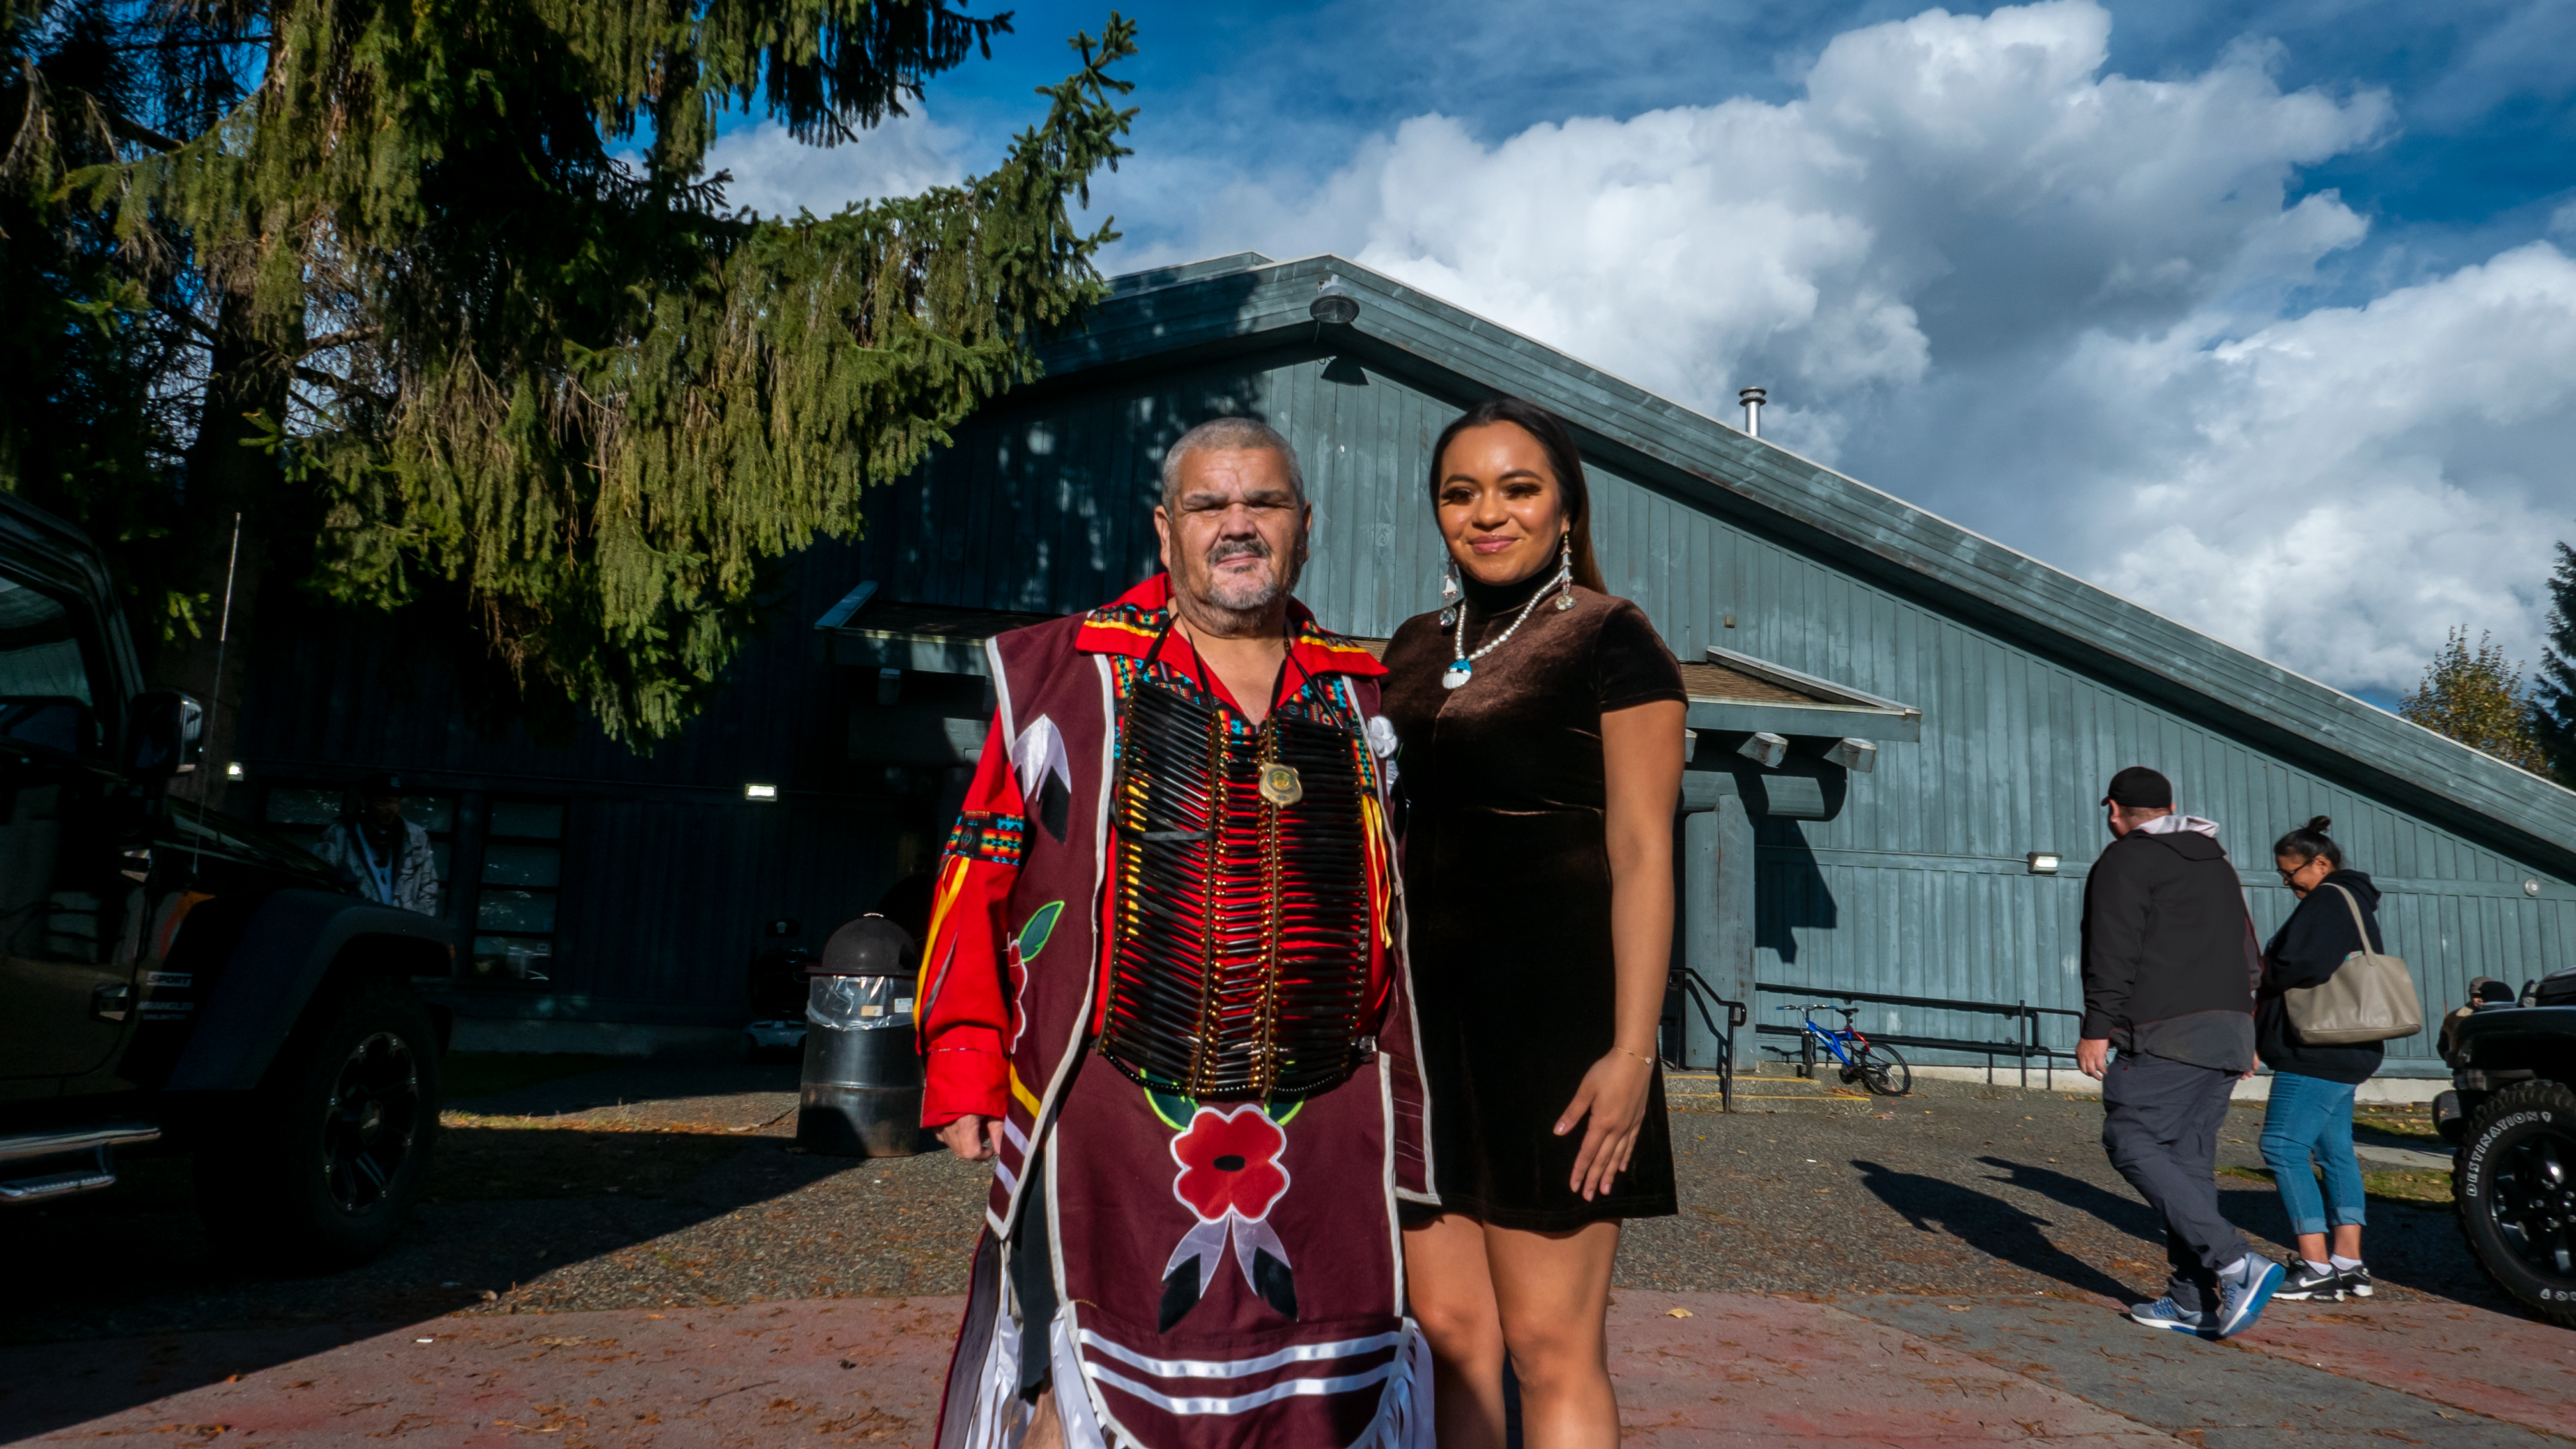 A man wearing traditional Indigenous powwow dressings adorned with poppies stands beside his adult daughter wearing a black dress. They are outdoors in daylight in front of a community centre.